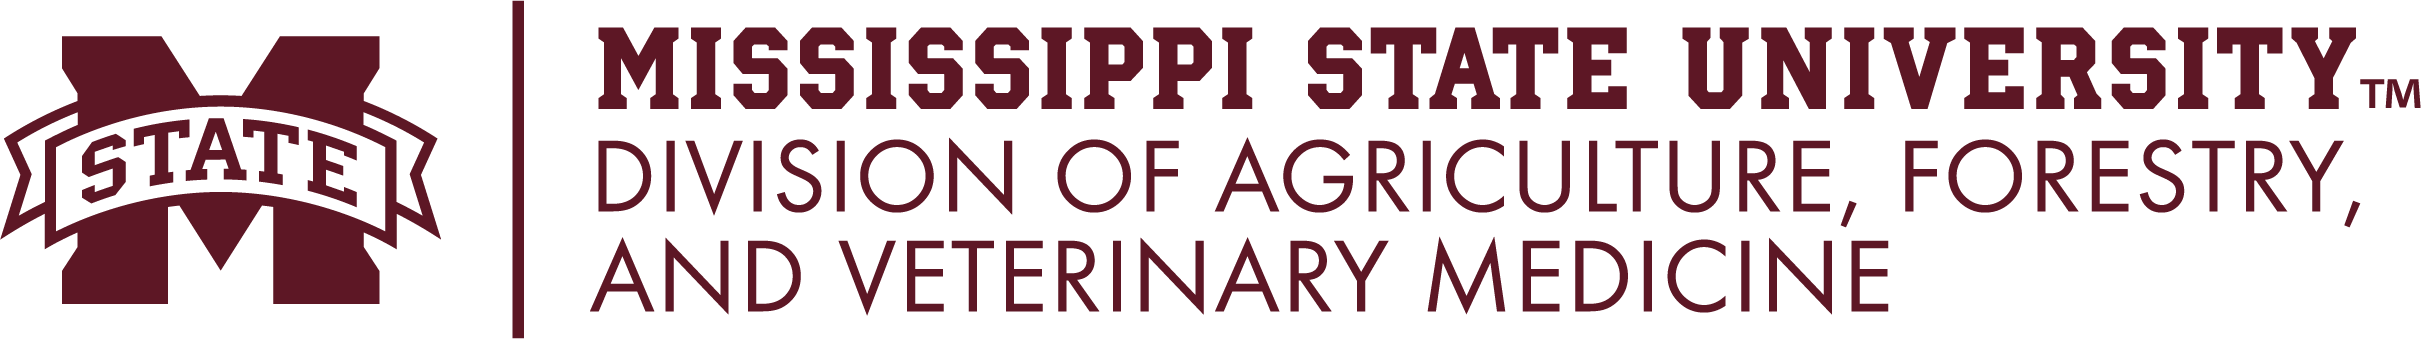 MSU Division of Agriculture, Forestry, and Veterinary Medicine logo